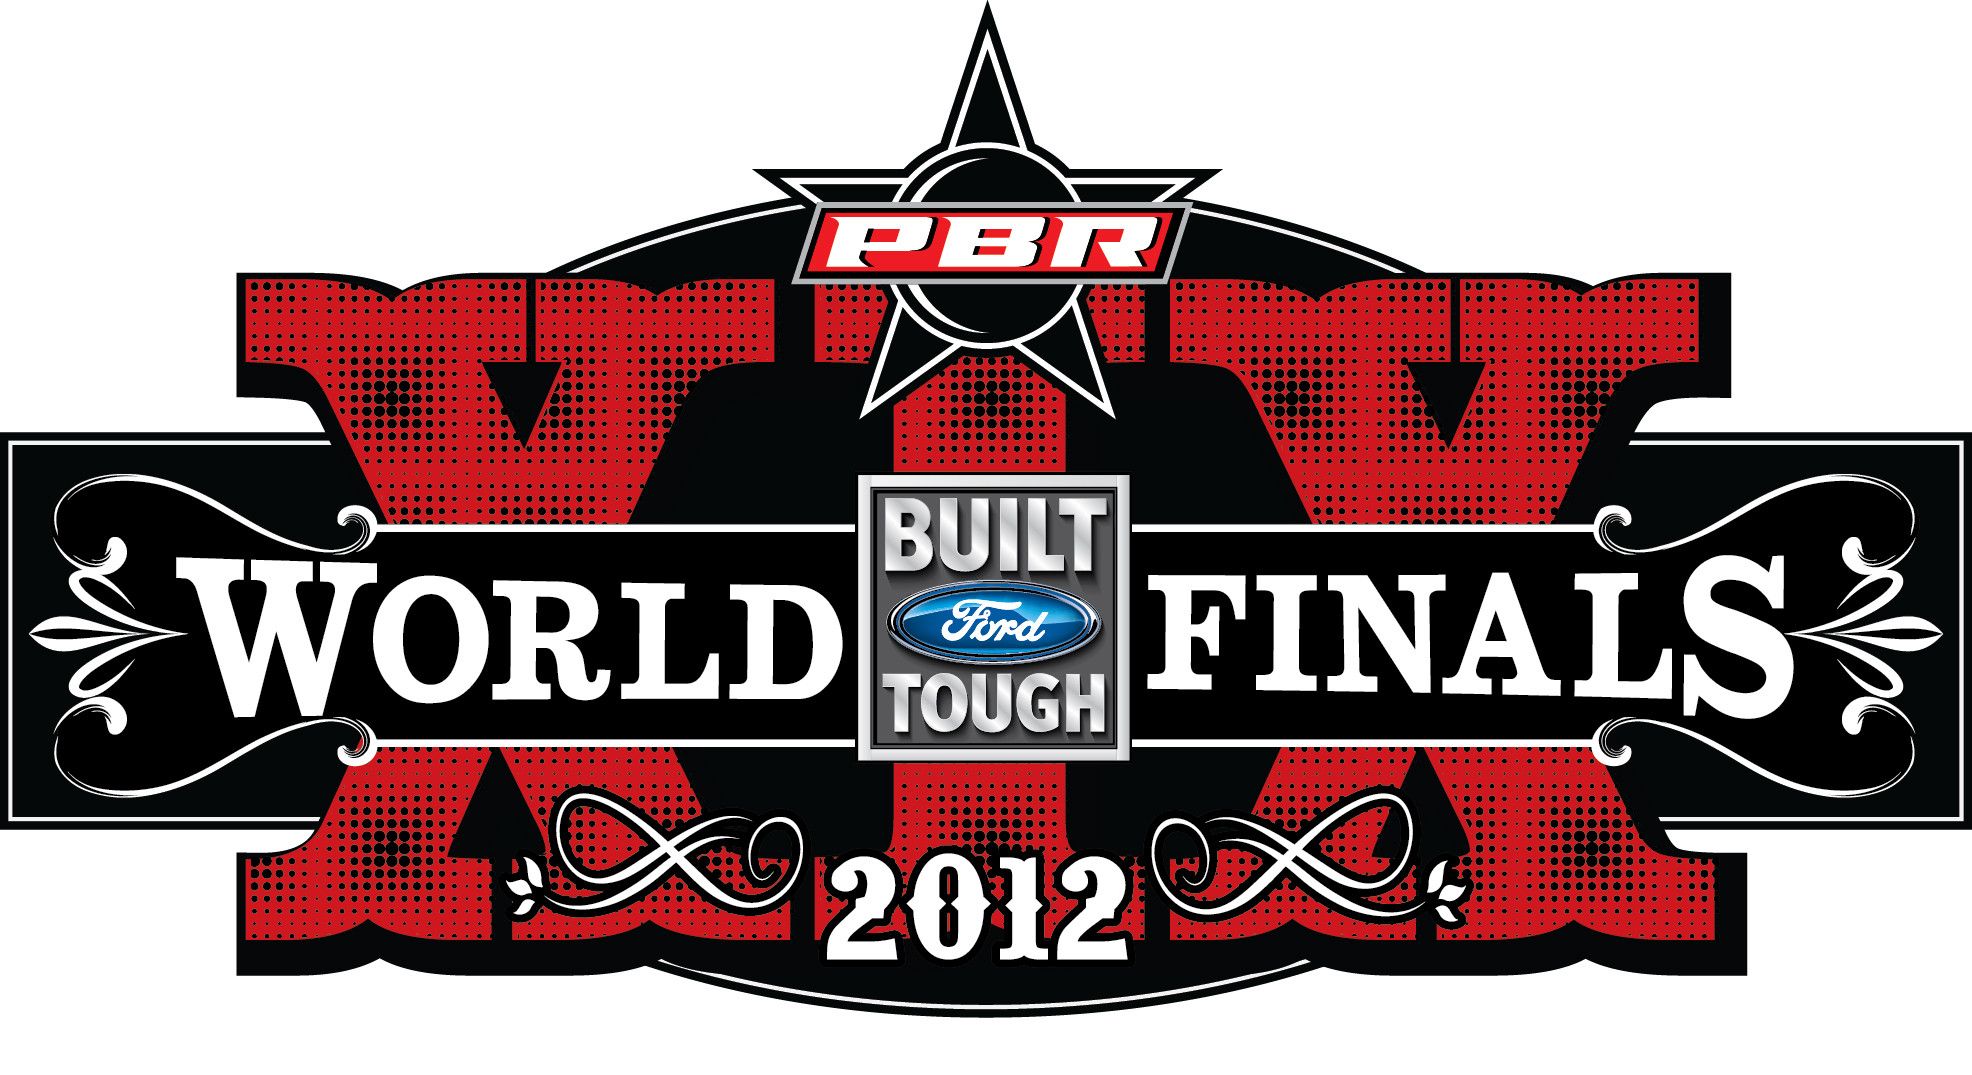 Pbr Built Ford Tough Series Las Vegas Buy Tickets To See The Pbr